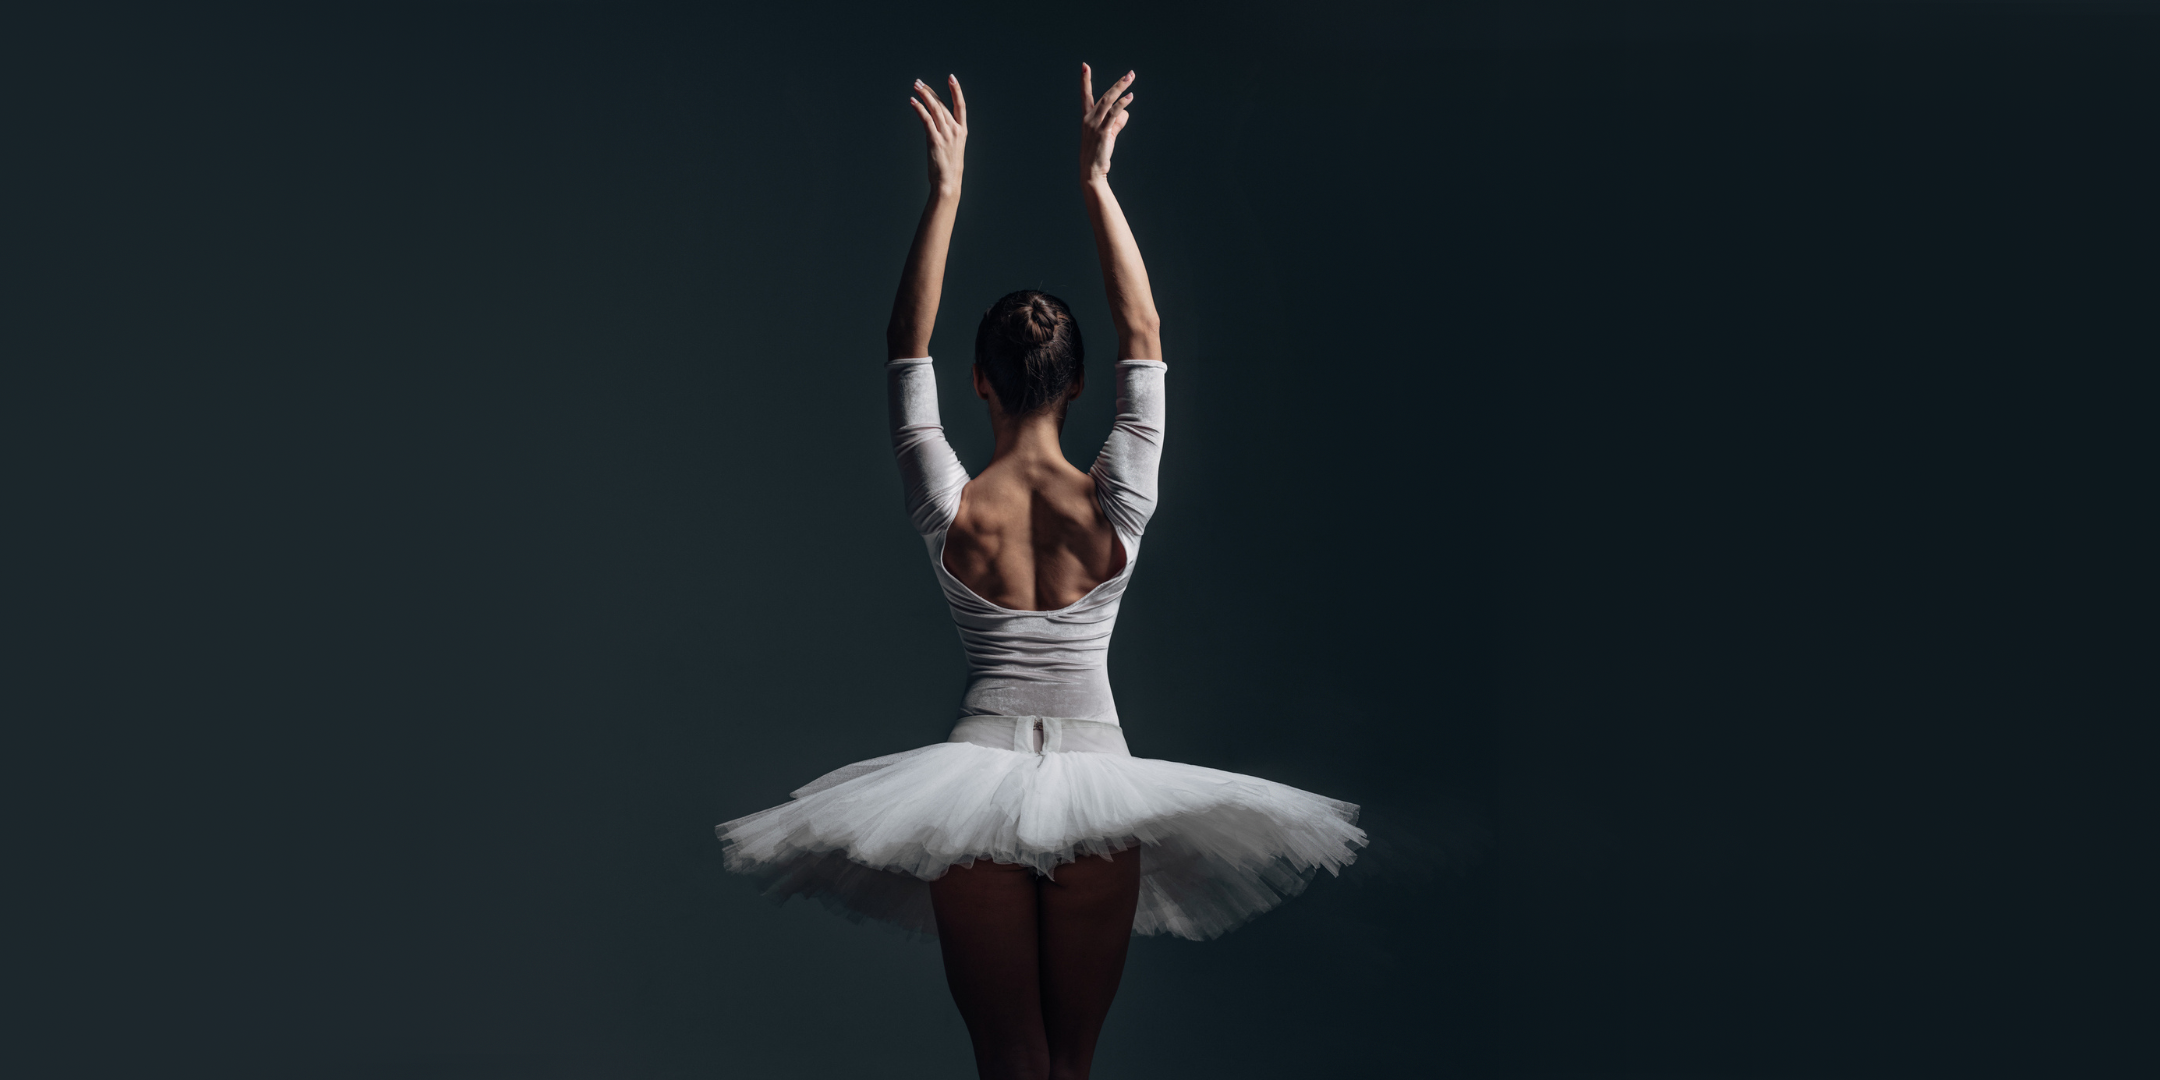 A female ballet dancer, shown with her back to the camera, poses with her arms up in a swan port de bras position. She wears a long-sleeved white leotard and a white pancake tutu.